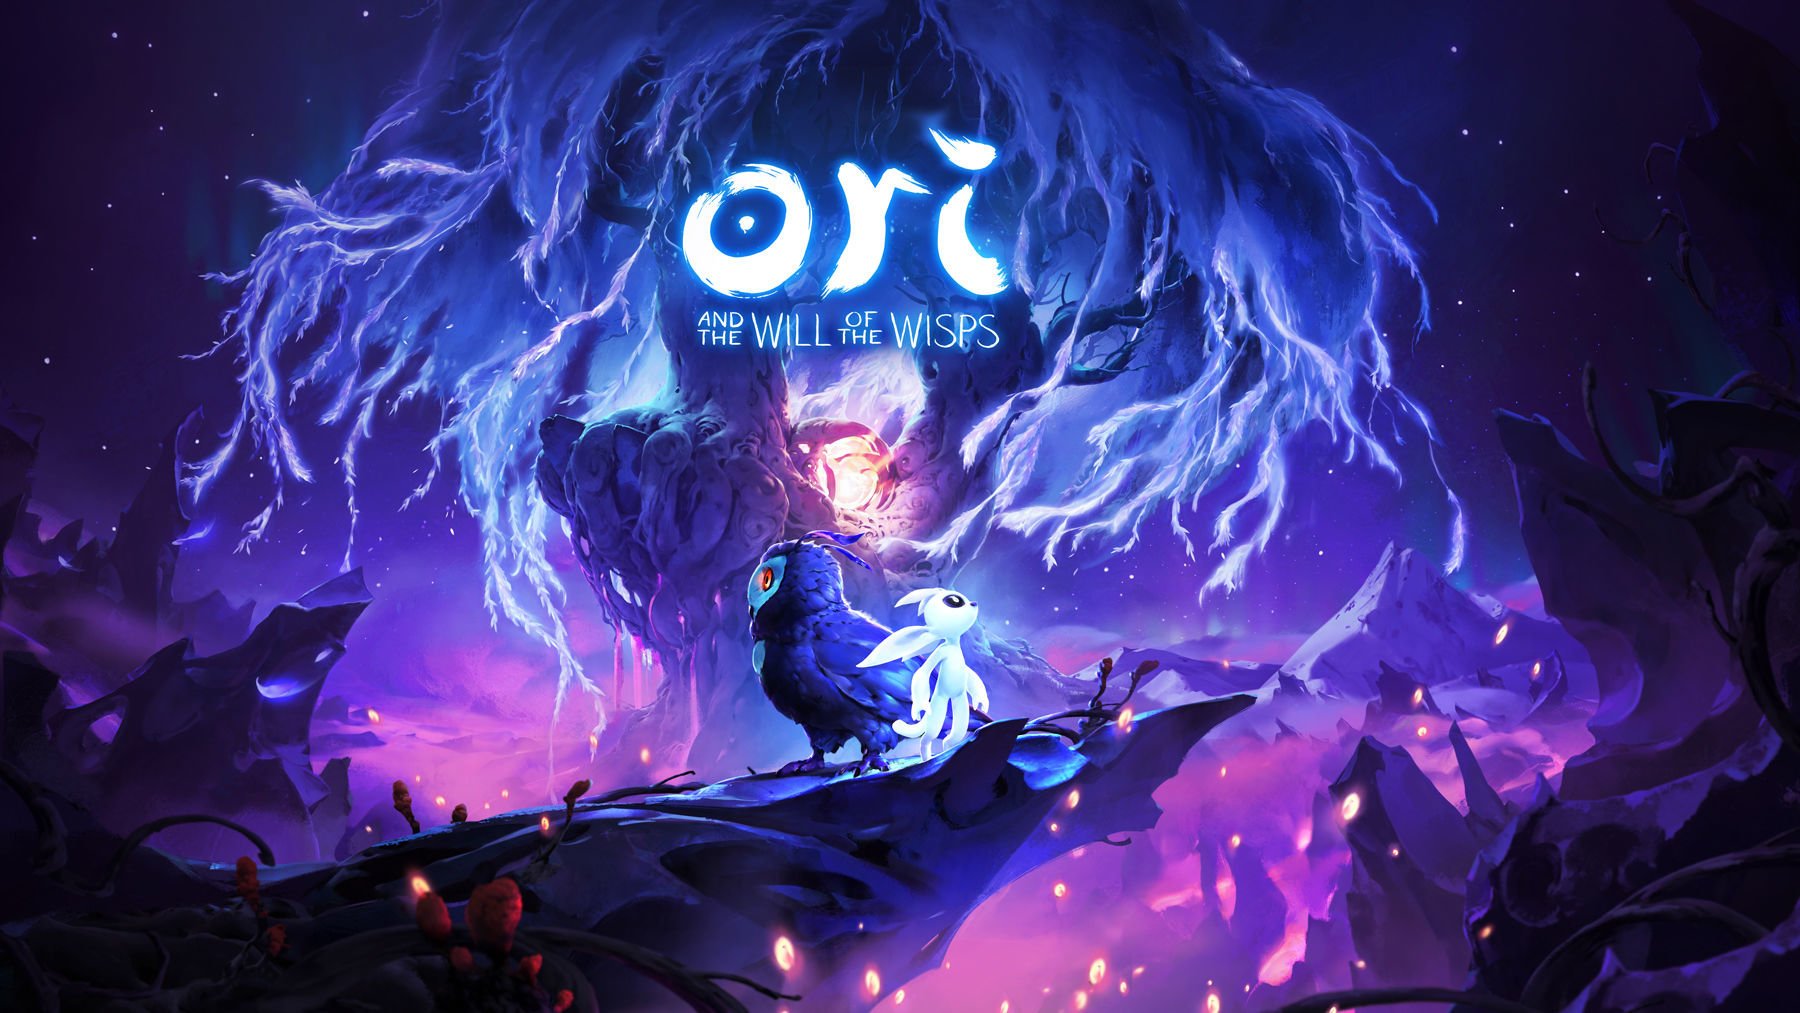 Ori and the will of the wisps na bgs 2019 | dims 2 | facebook | ori and the will of the wisps facebook